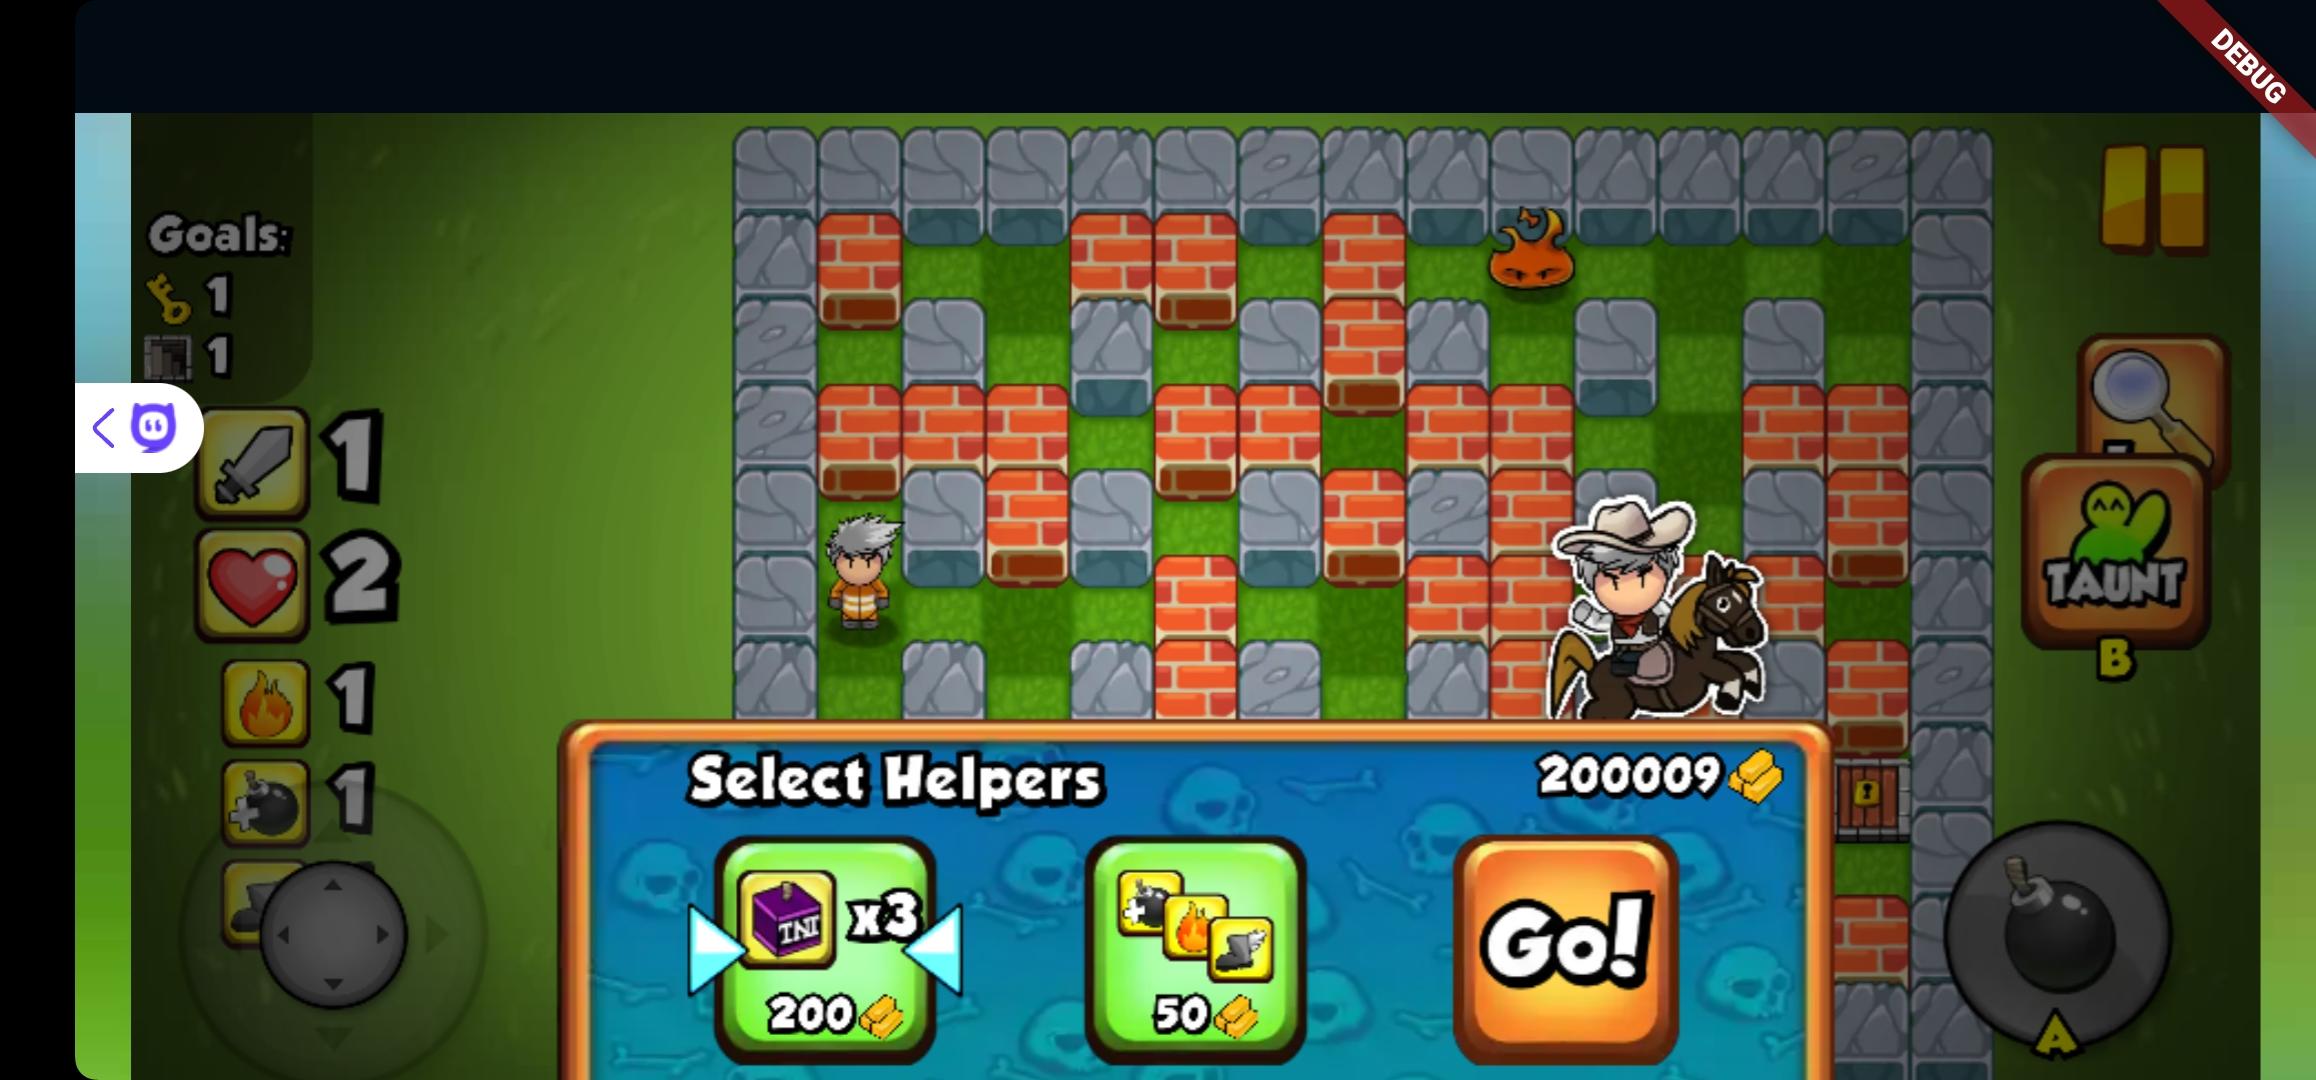 Bomber Friends APK Download for Android Free